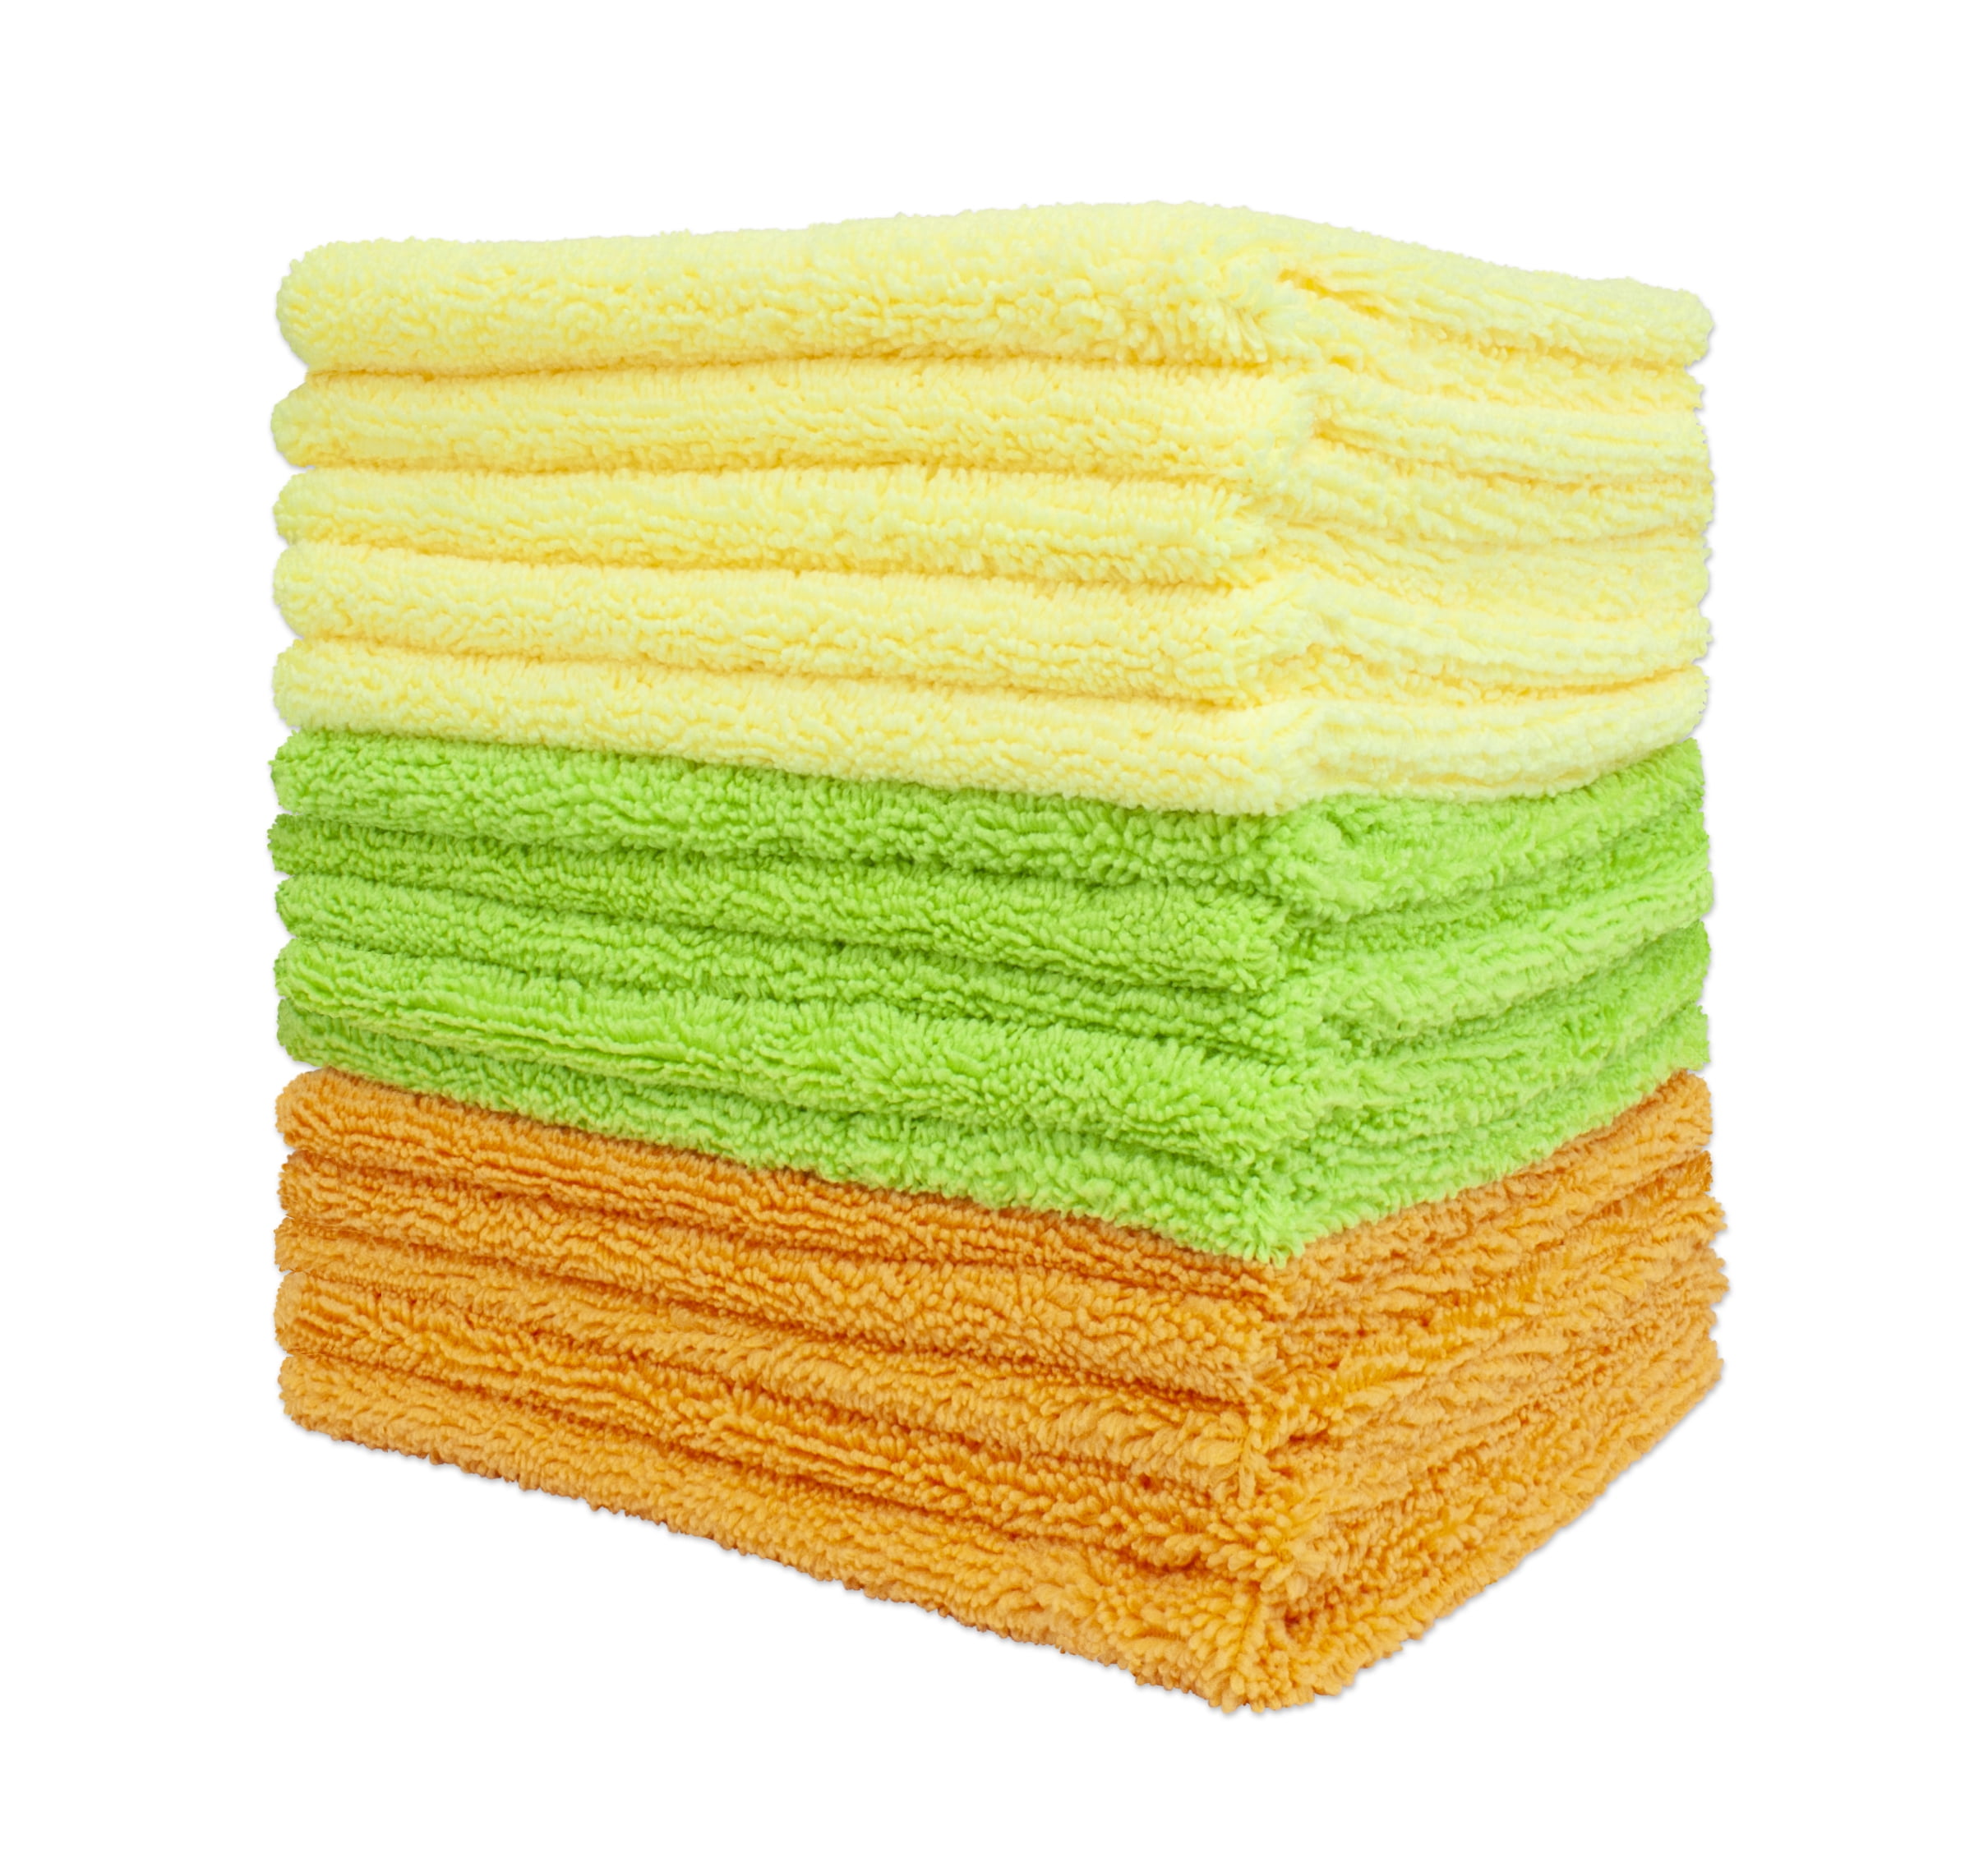 Microfiber Cleaning Cloth 10 Pic Duster 30x30cm Kitchen Dirt Cleaning Towels clo 